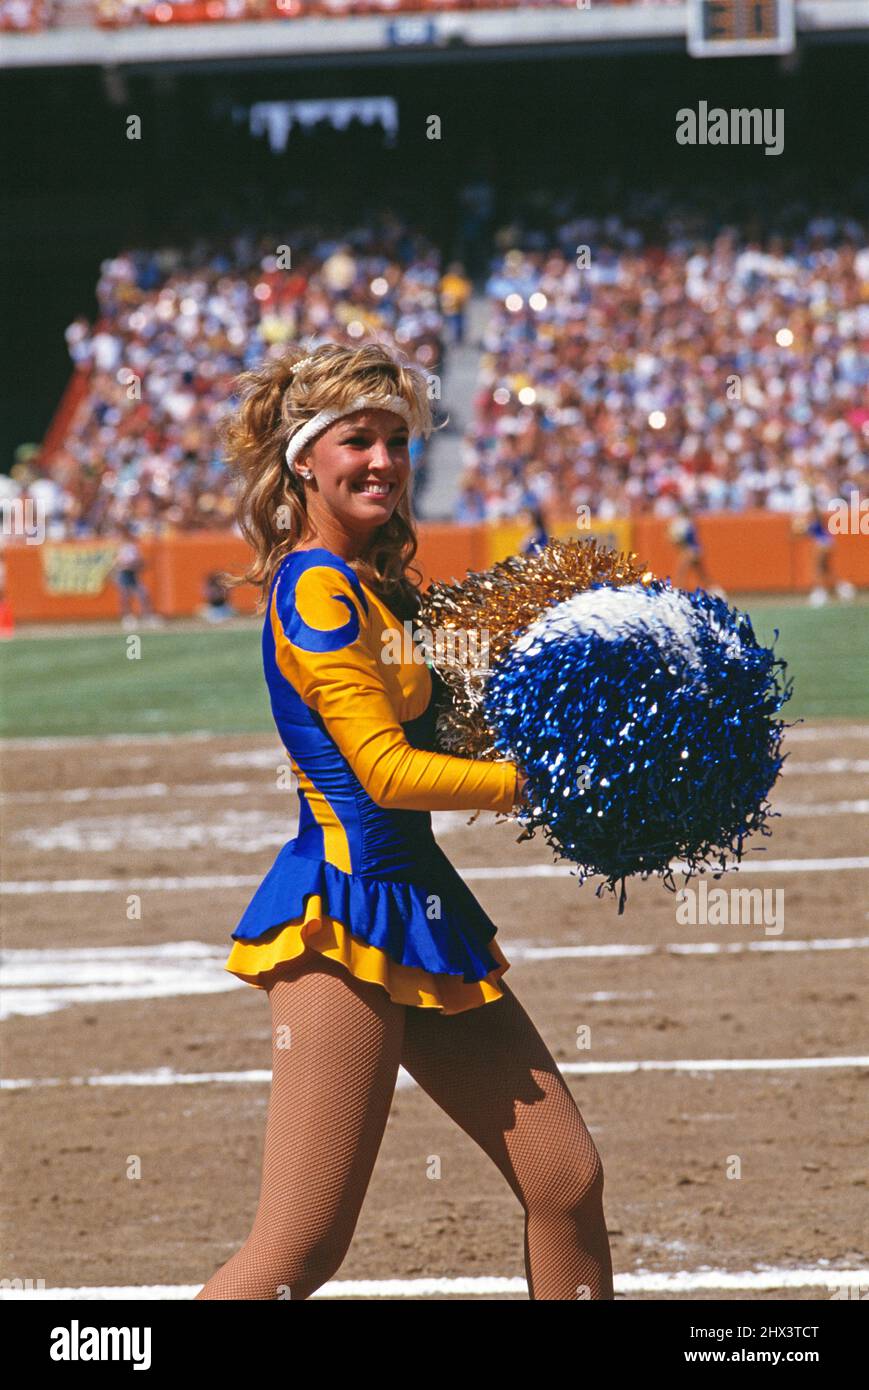 United States. Sport. Young woman cheerleader at American Football came. Stock Photo